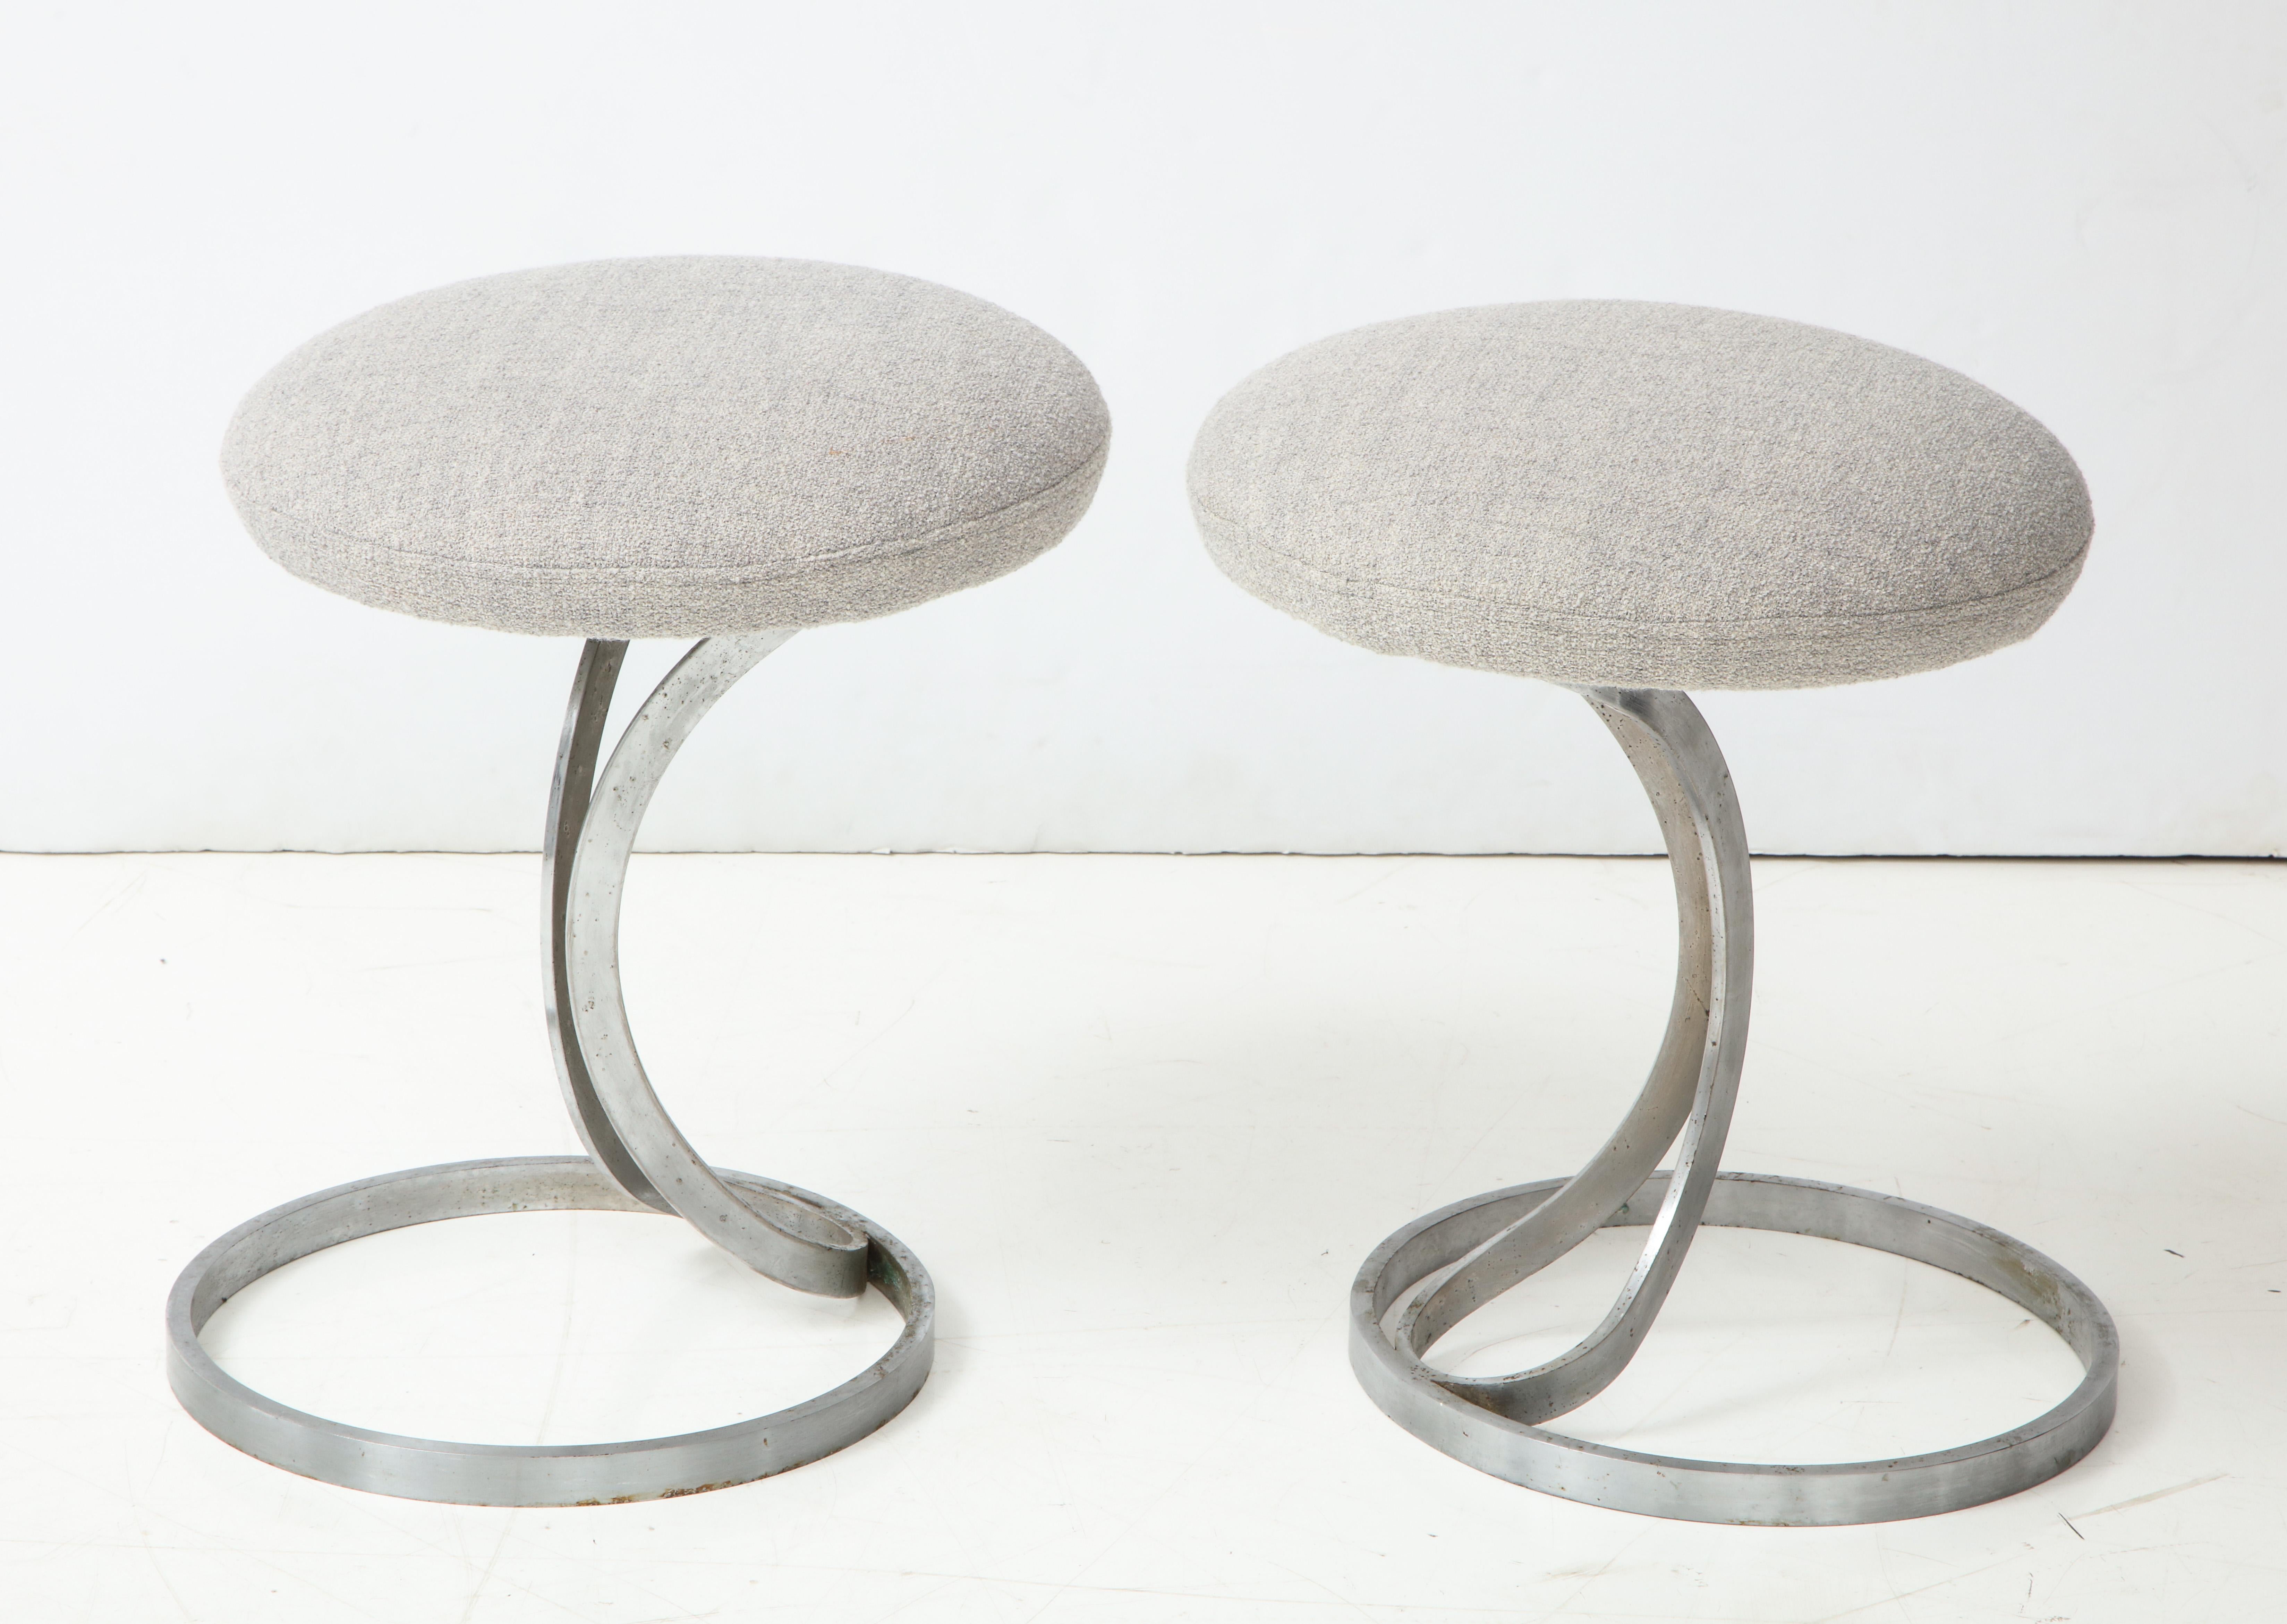 Upholstered metal stools by Boris Tabacoff, France, 1970s.

These elegant stools exhibit the sinuous lines + signature sphere base typical of Tabacoff's postwar design work. The stools have been newly reupholstered in a textured light grey boucle